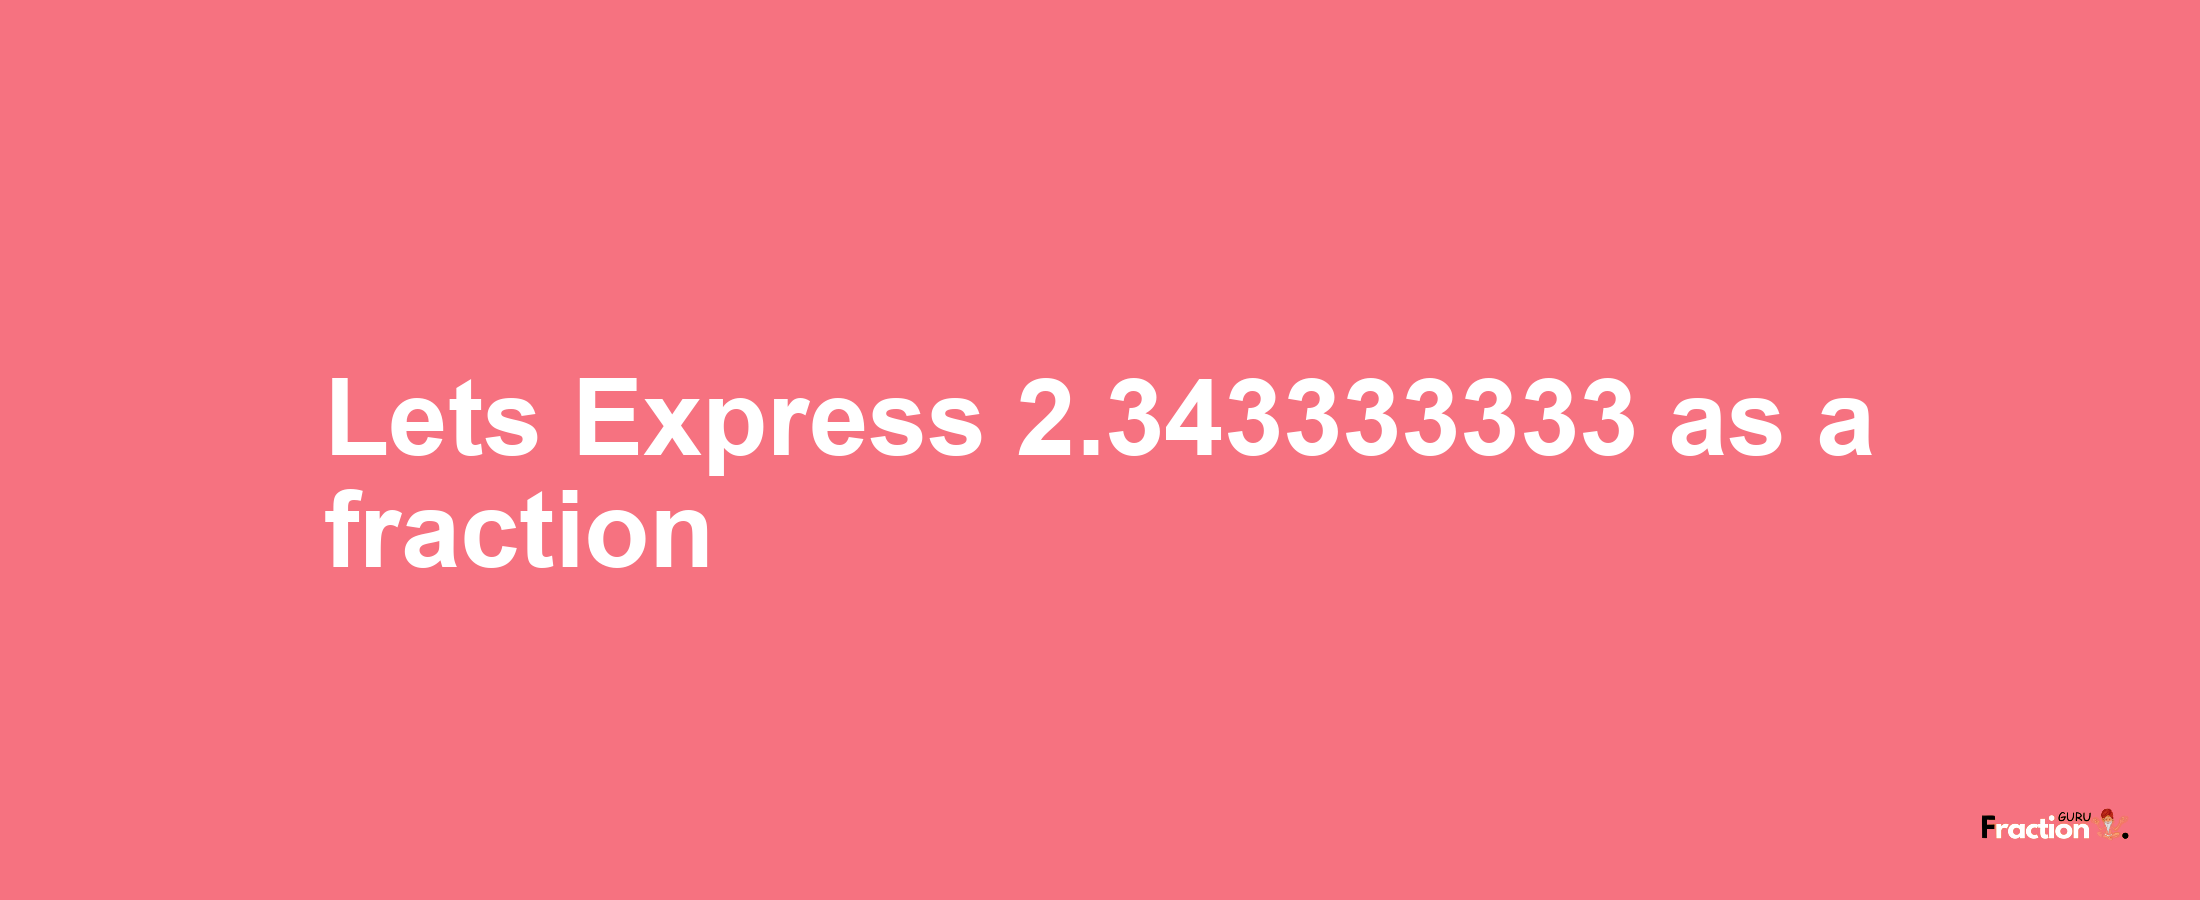 Lets Express 2.343333333 as afraction